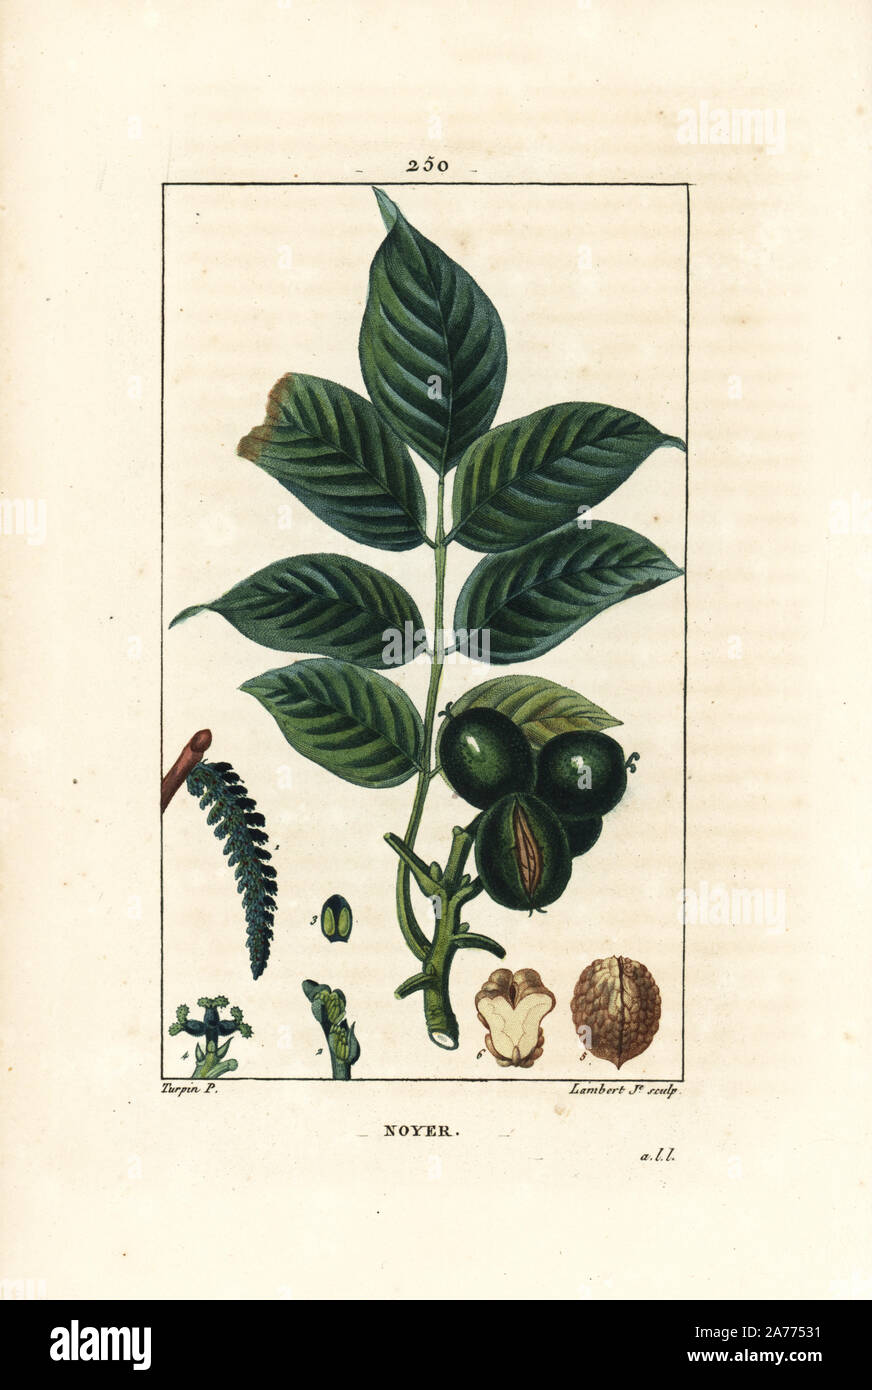 Walnut tree, Juglans regia, with branch, leaves, ripe fruit, nut in shell and in section. Handcoloured stipple copperplate engraving by Lambert Junior from a drawing by Pierre Jean-Francois Turpin from Chaumeton, Poiret et Chamberet's "La Flore Medicale," Paris, Panckoucke, 1830. Turpin (1775~1840) was one of the three giants of French botanical art of the era alongside Pierre Joseph Redoute and Pancrace Bessa. Stock Photo